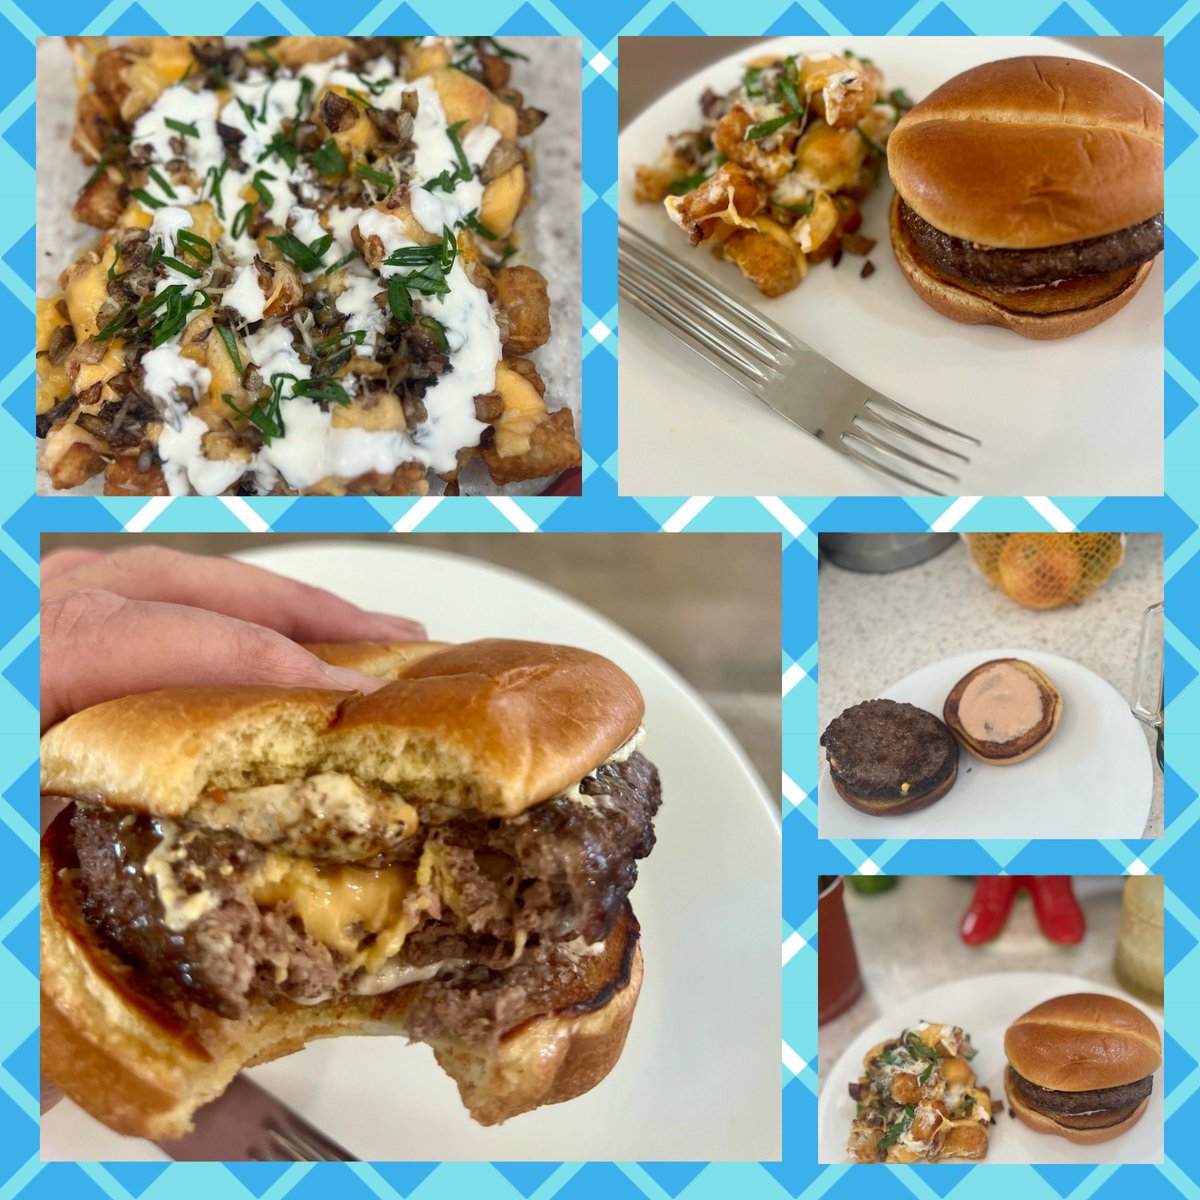 #May21FamilyFoodNight Fun with Fast Food! Juicy Lucy Burgers with loaded tots. It was gooood! #ThatFork #ThatDorkFork